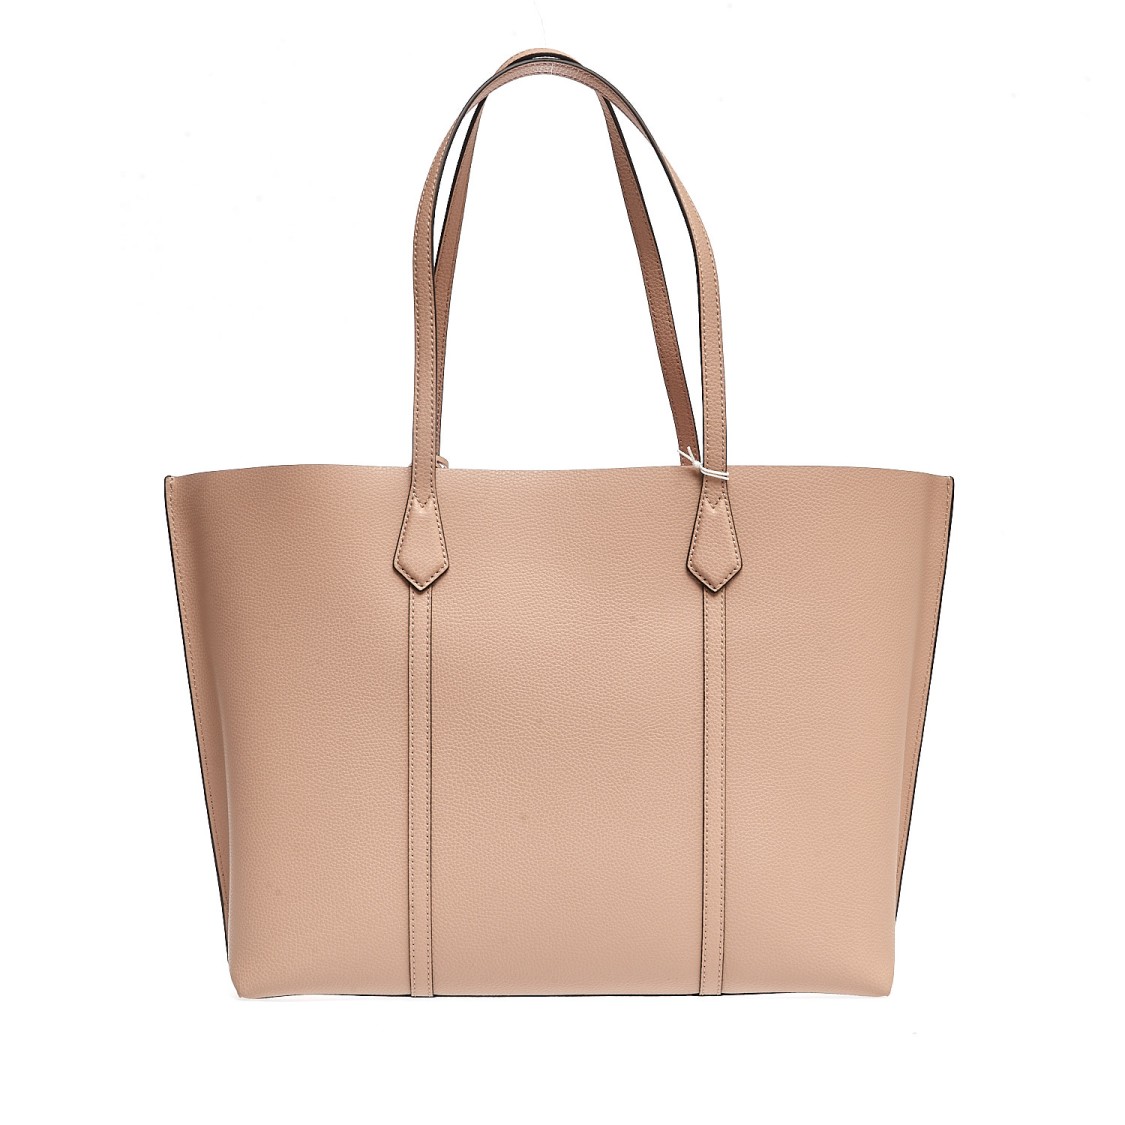 Devon Sand Perry Triple Compartment Tote Bag by Tory Burch in Neutrals  color for Luxury Clothing